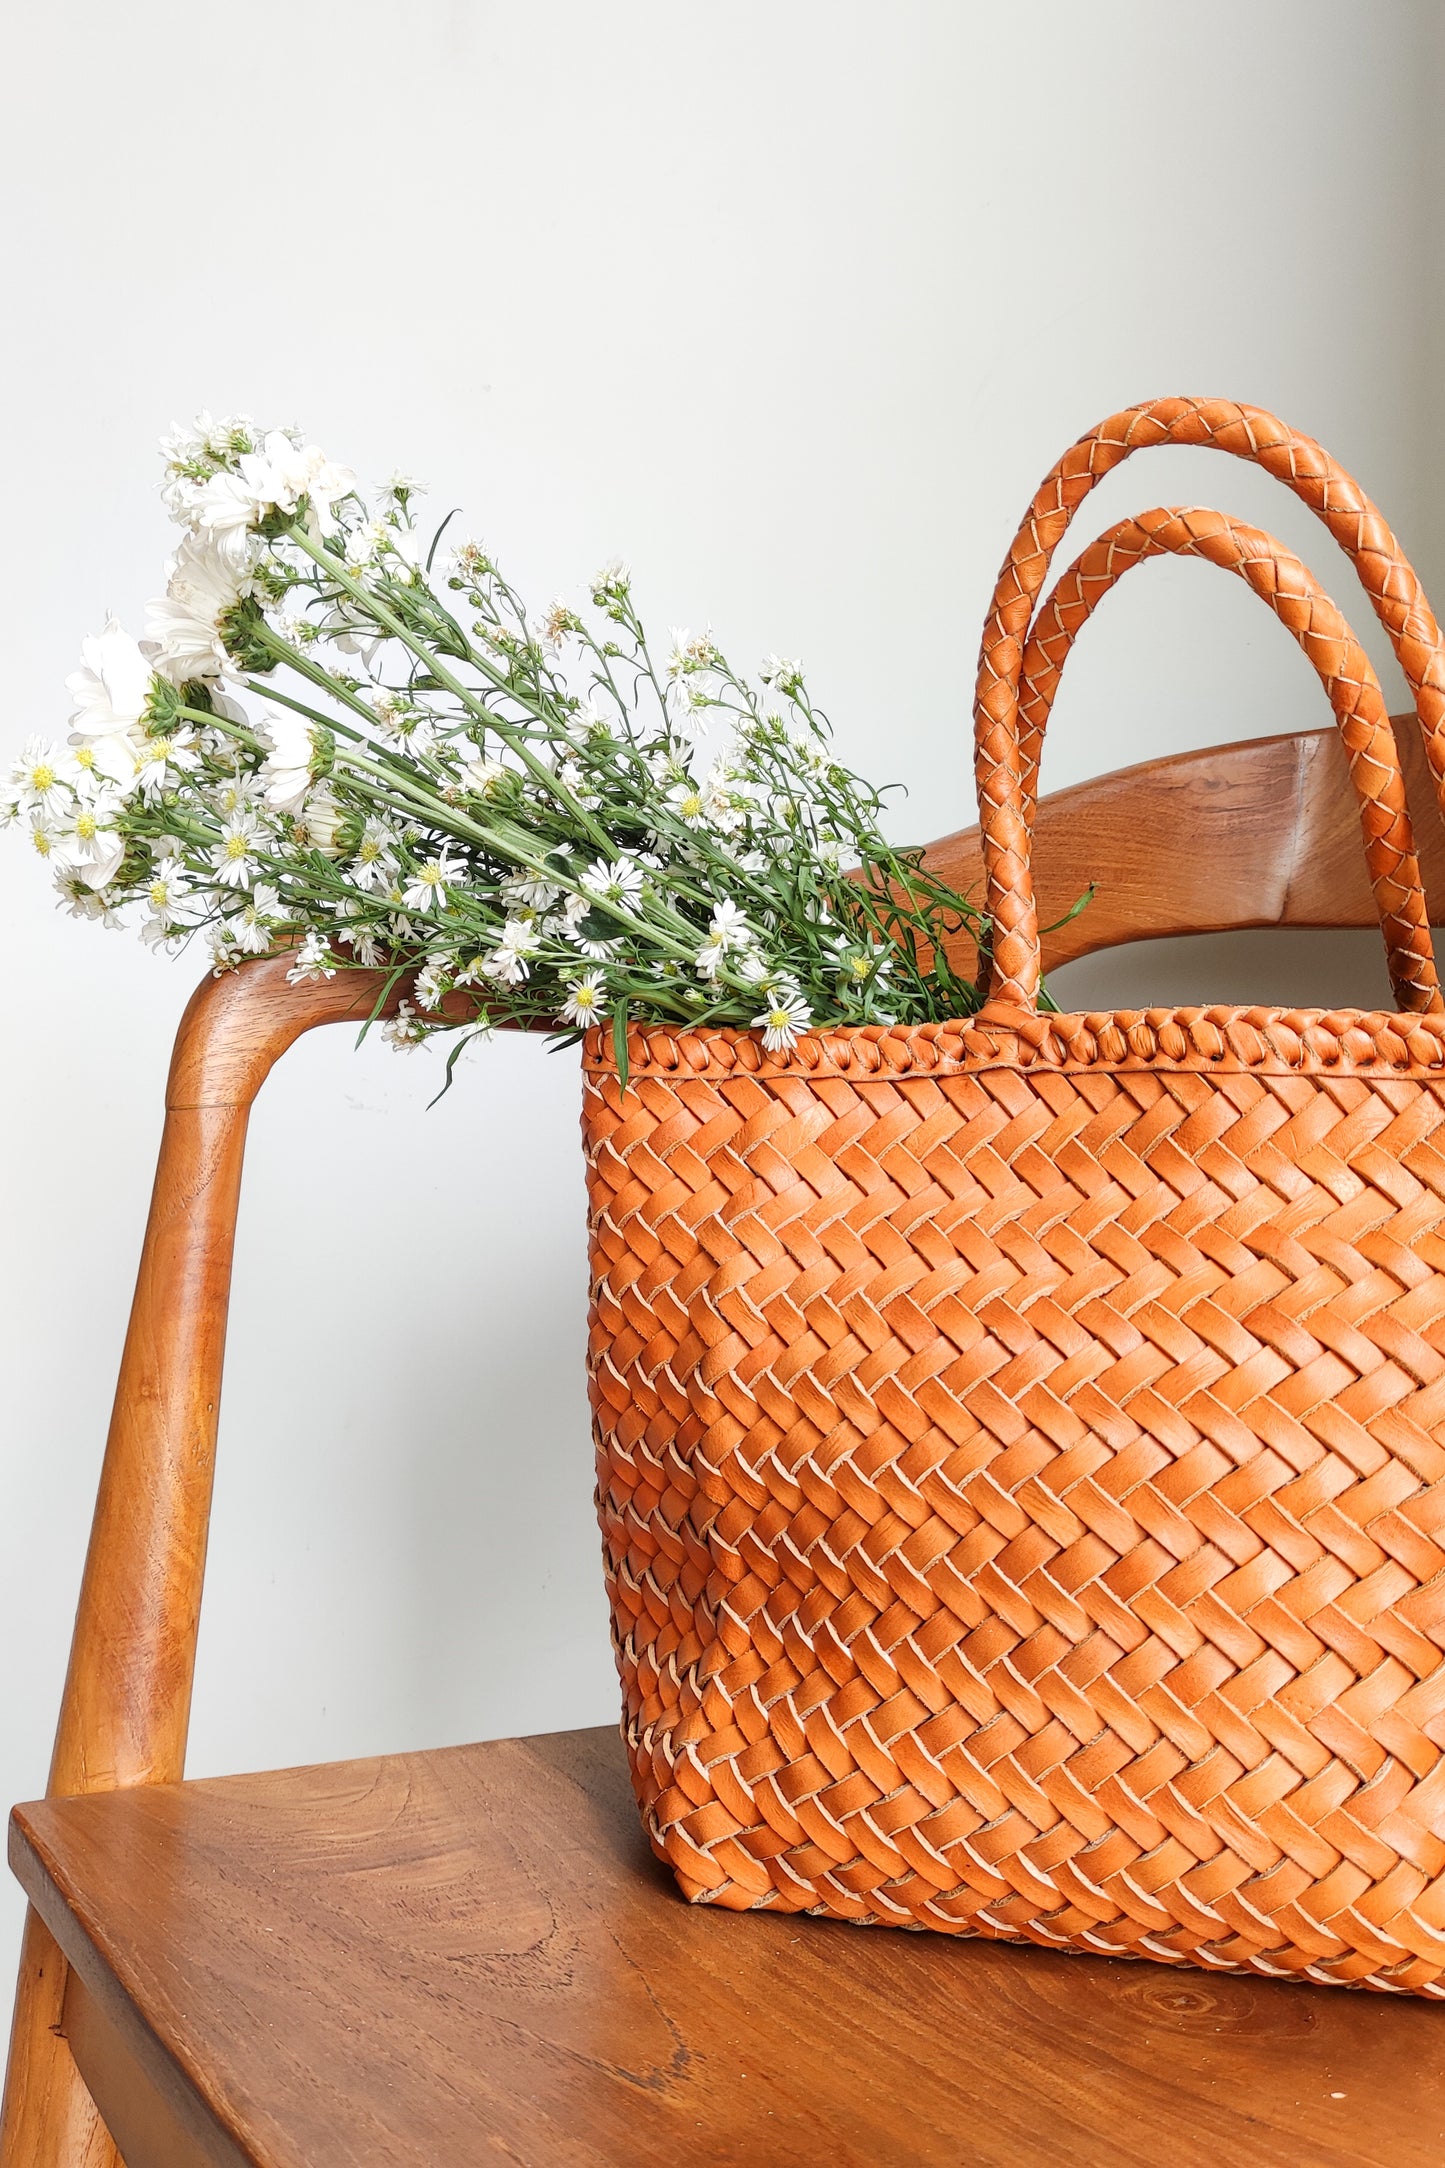 A woven bag placed on a wooden chair is the Cening Woven Bag from Seminyak Leather Bali. This honey tan colored bag is made of vegtanned leather which is shaped using a woven method to form a strong and beautiful bag.